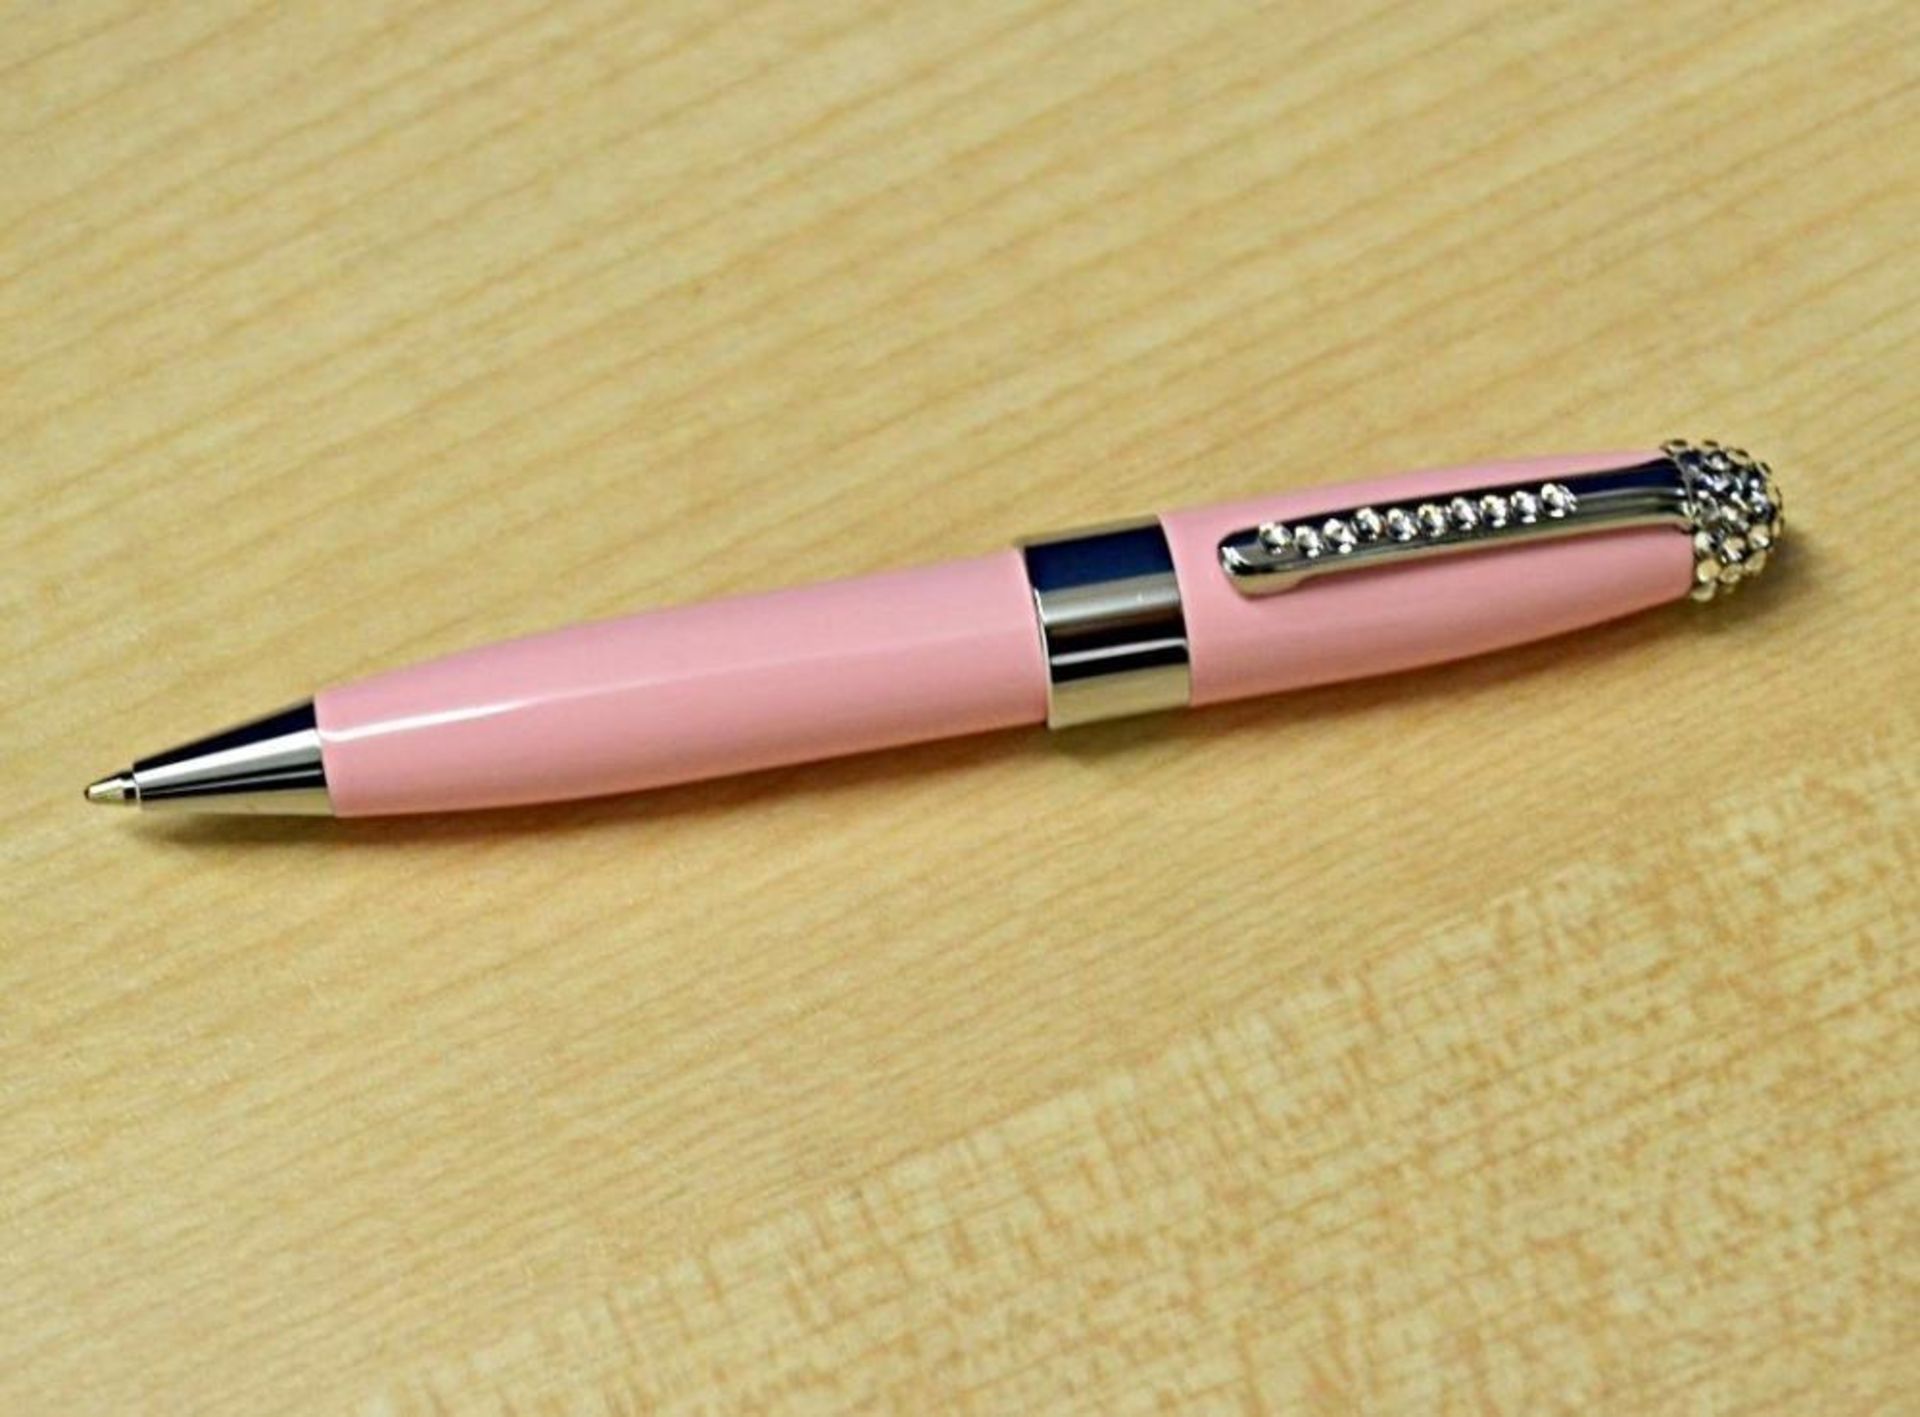 1 x ICE LONDON "Duchess" Ladies Pen Embellished With SWAROVSKI Crystals - Colour: Light Pink - Brand - Image 2 of 3